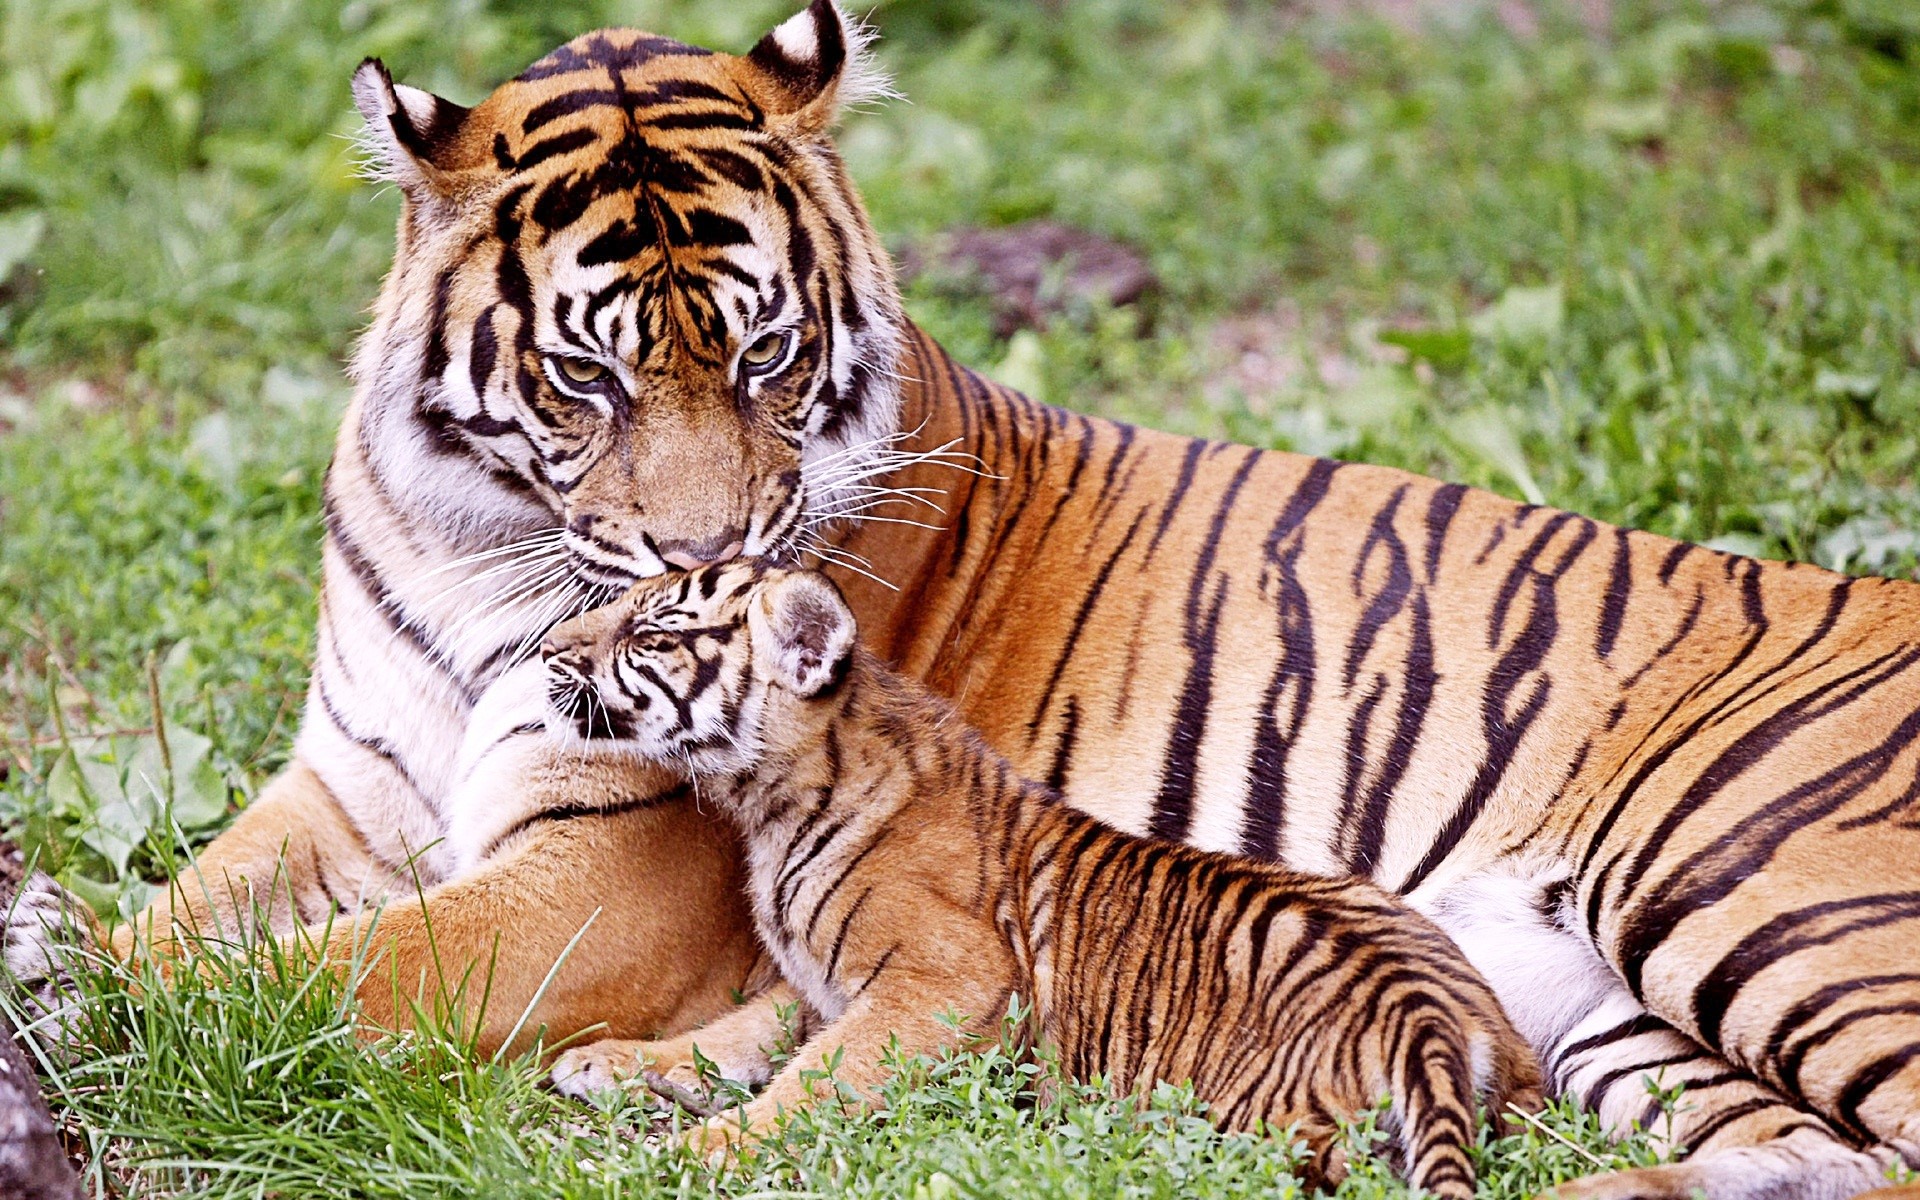 Tiger Seating with Baby Cub Wild Animal HD Wallpapers HD Wallpapers